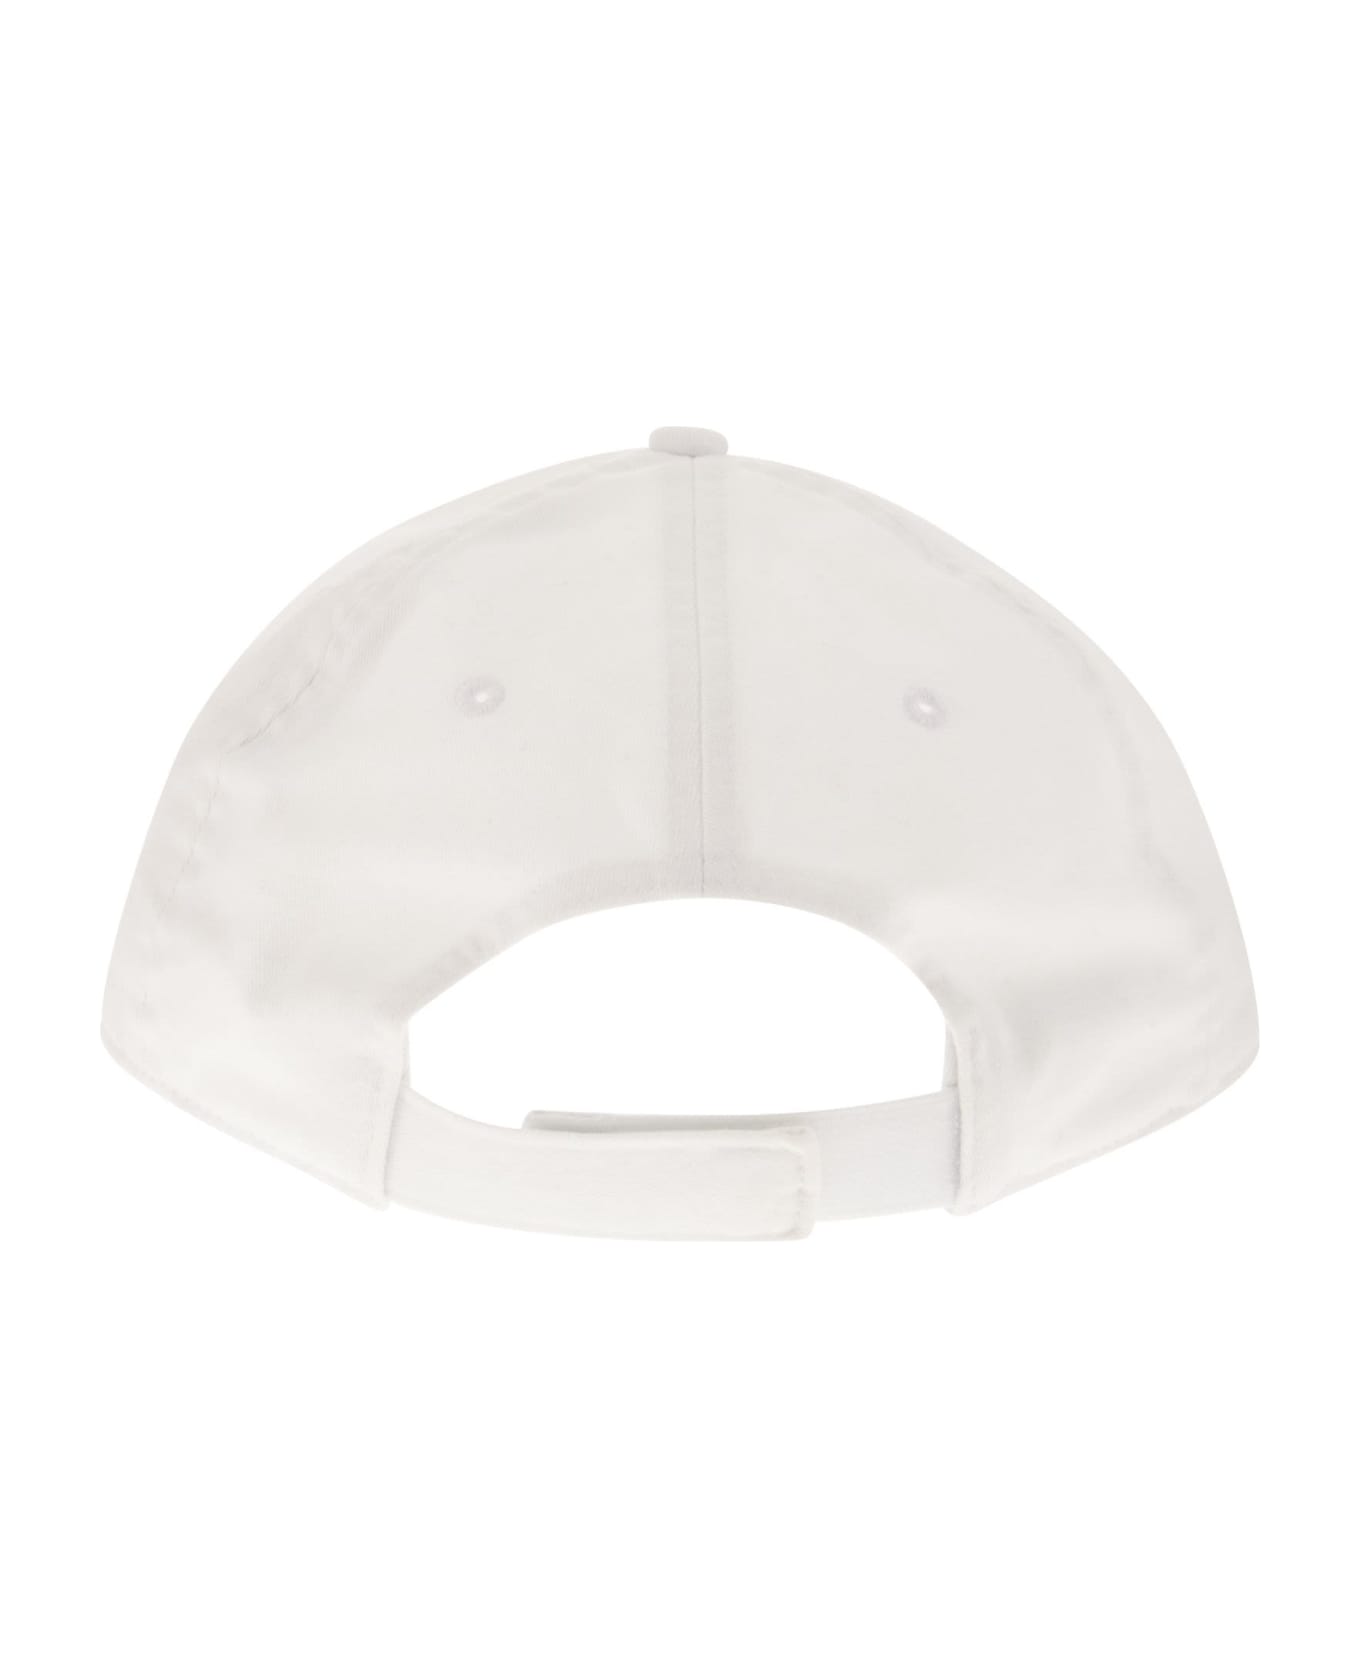 Canada Goose Hat With Visor - White 帽子